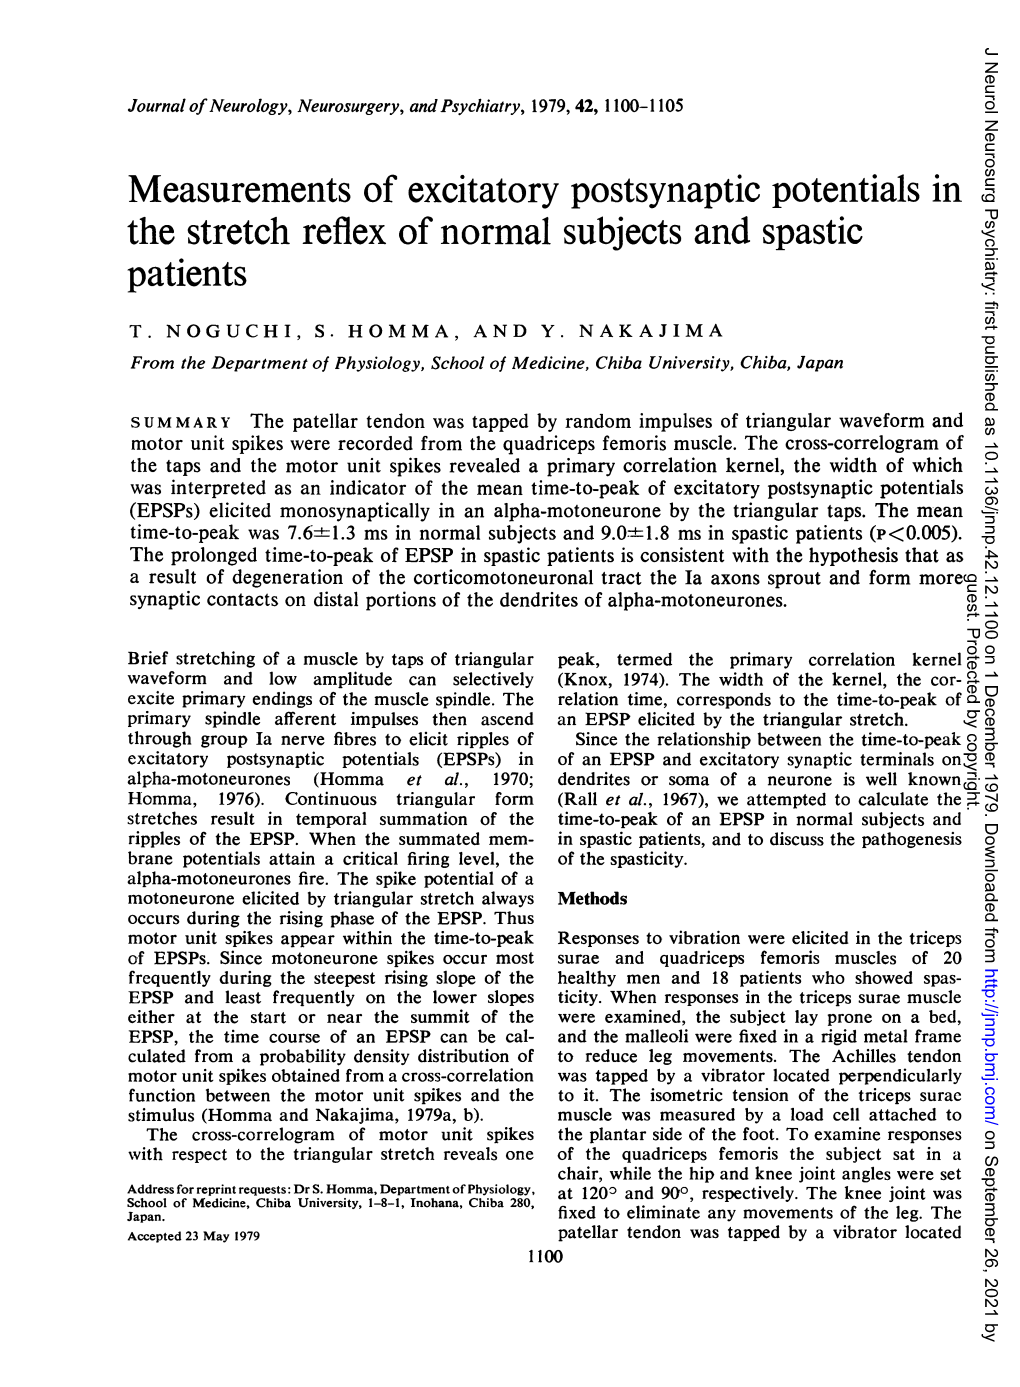 Measurements of Excitatory Postsynaptic Potentials in the Stretch Reflex of Normal Subjects and Spastic Patients